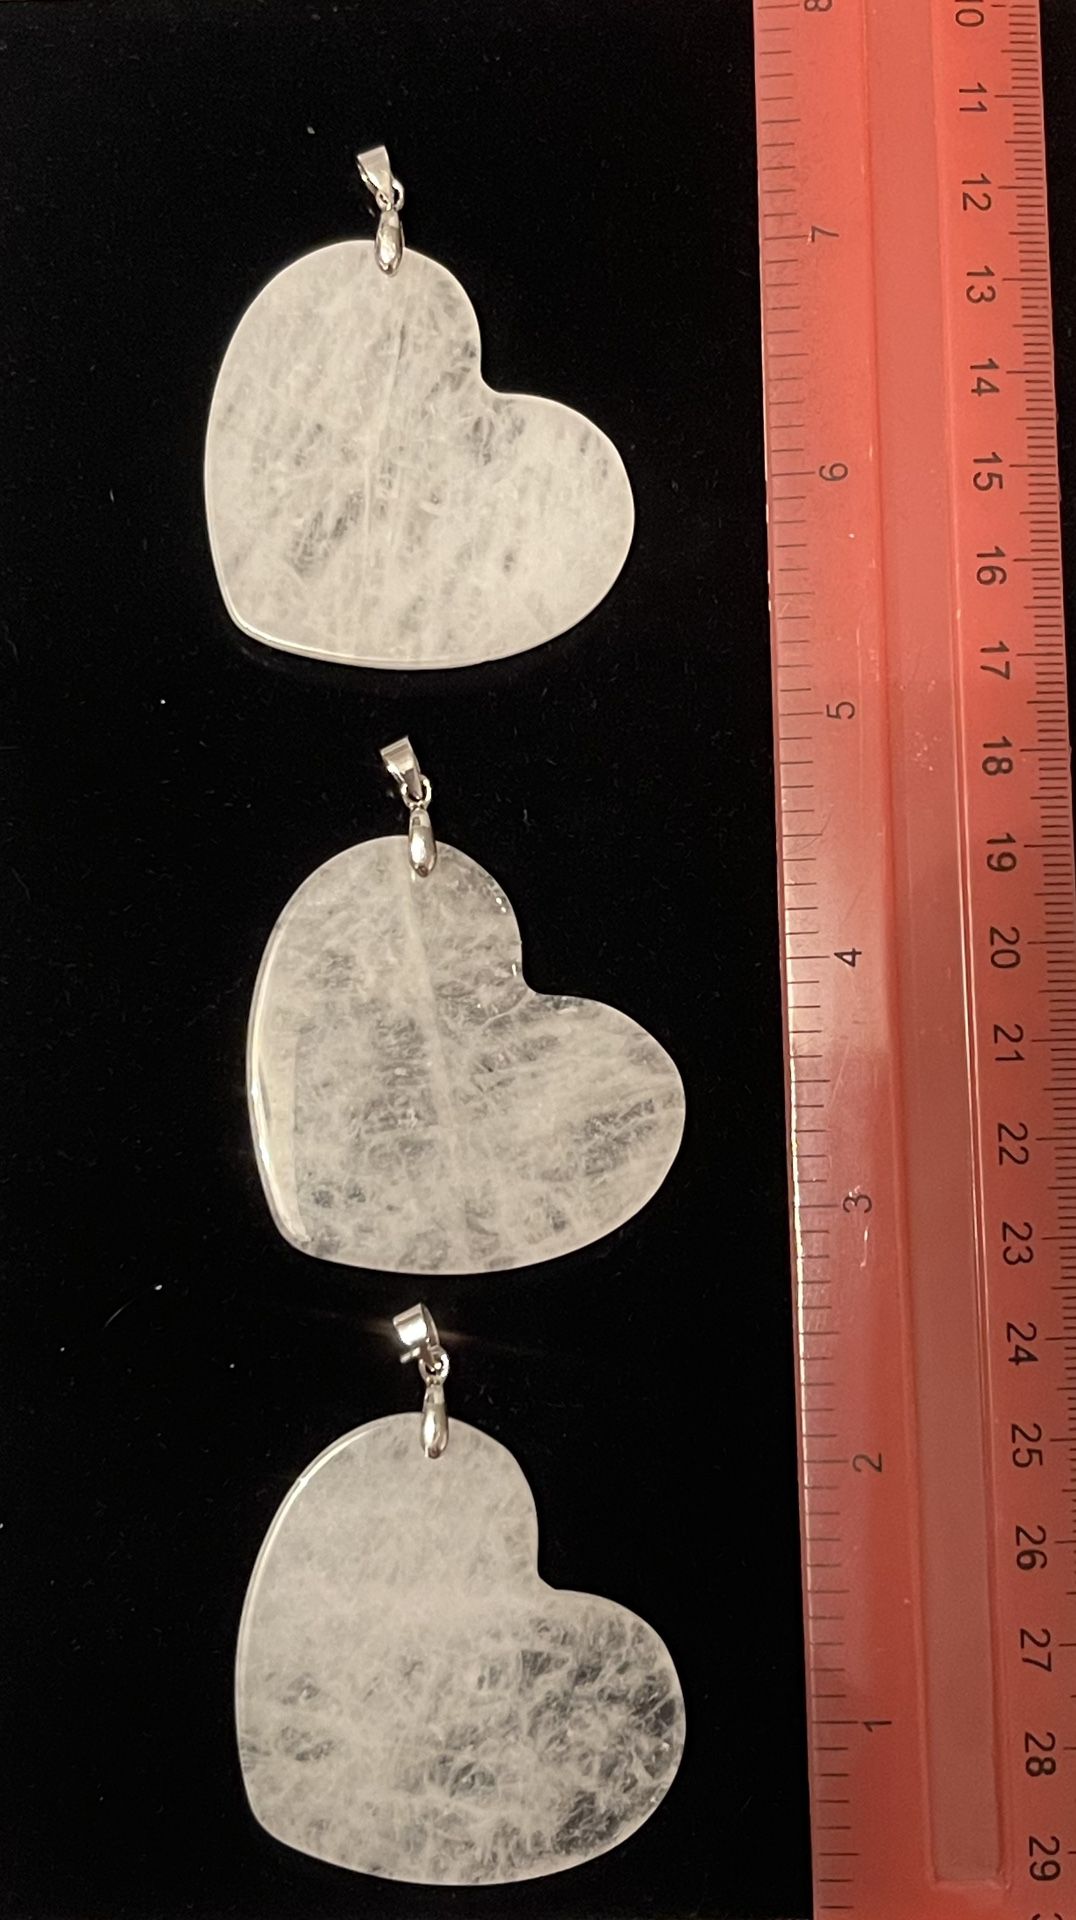 3 Clear Quartz Heart Shaped Necklace. Great for mothers day gift